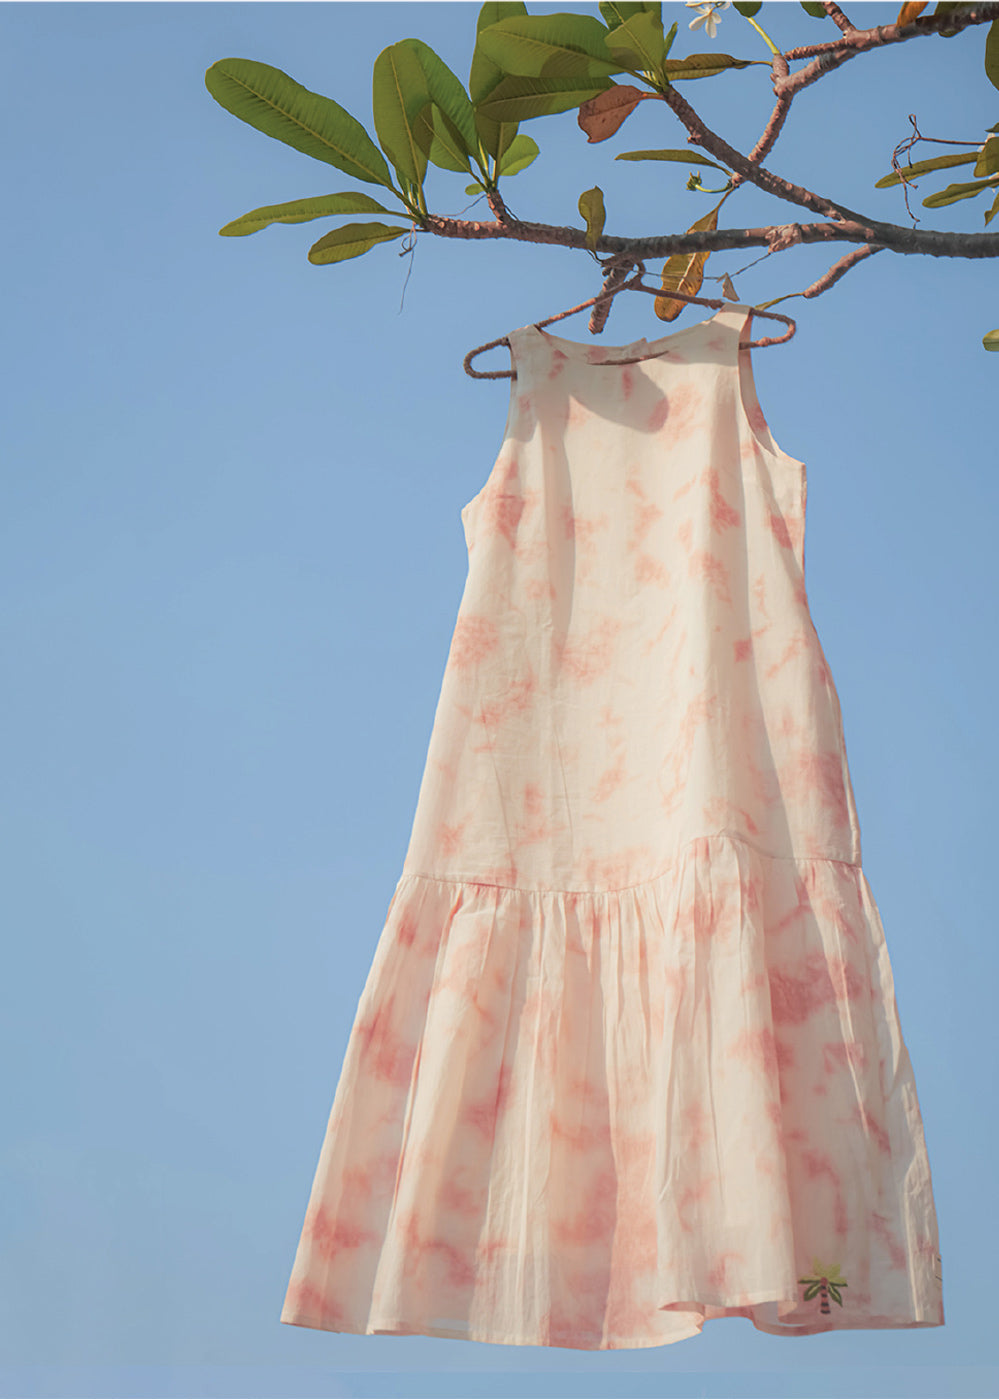 In shades of Pink, White and Beige is a comfortable fit dress with pockets,